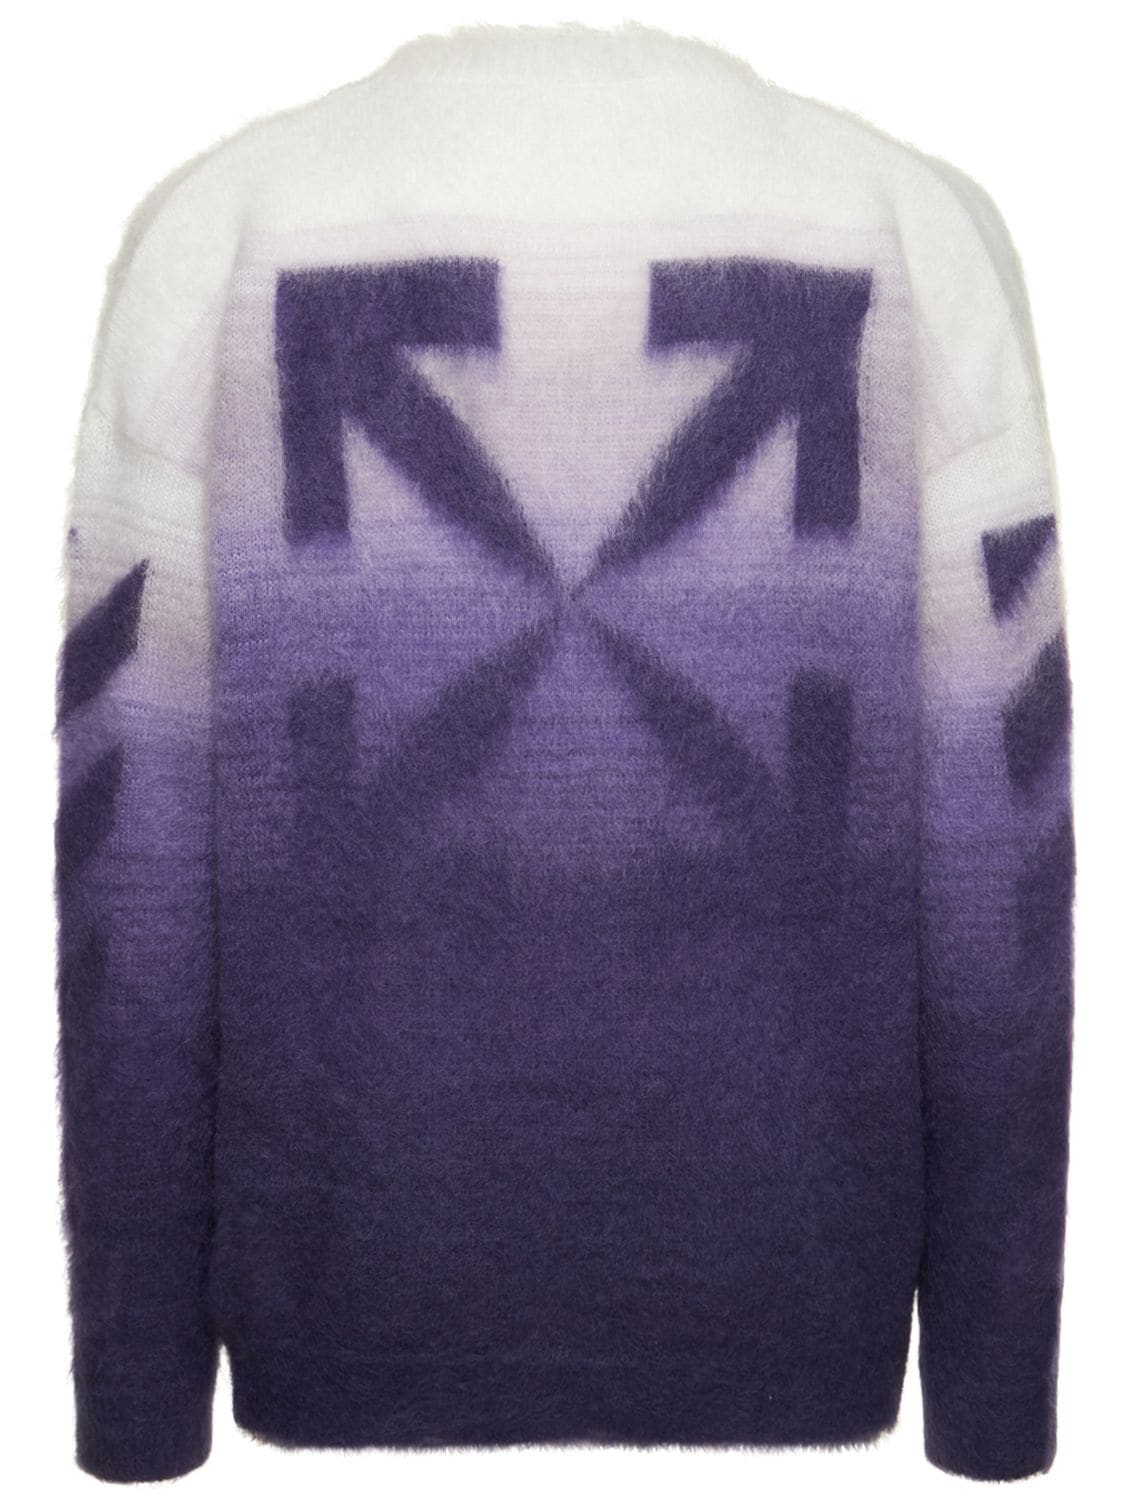 OFF-WHITE Diag Arrow Brushed Knit Sweater